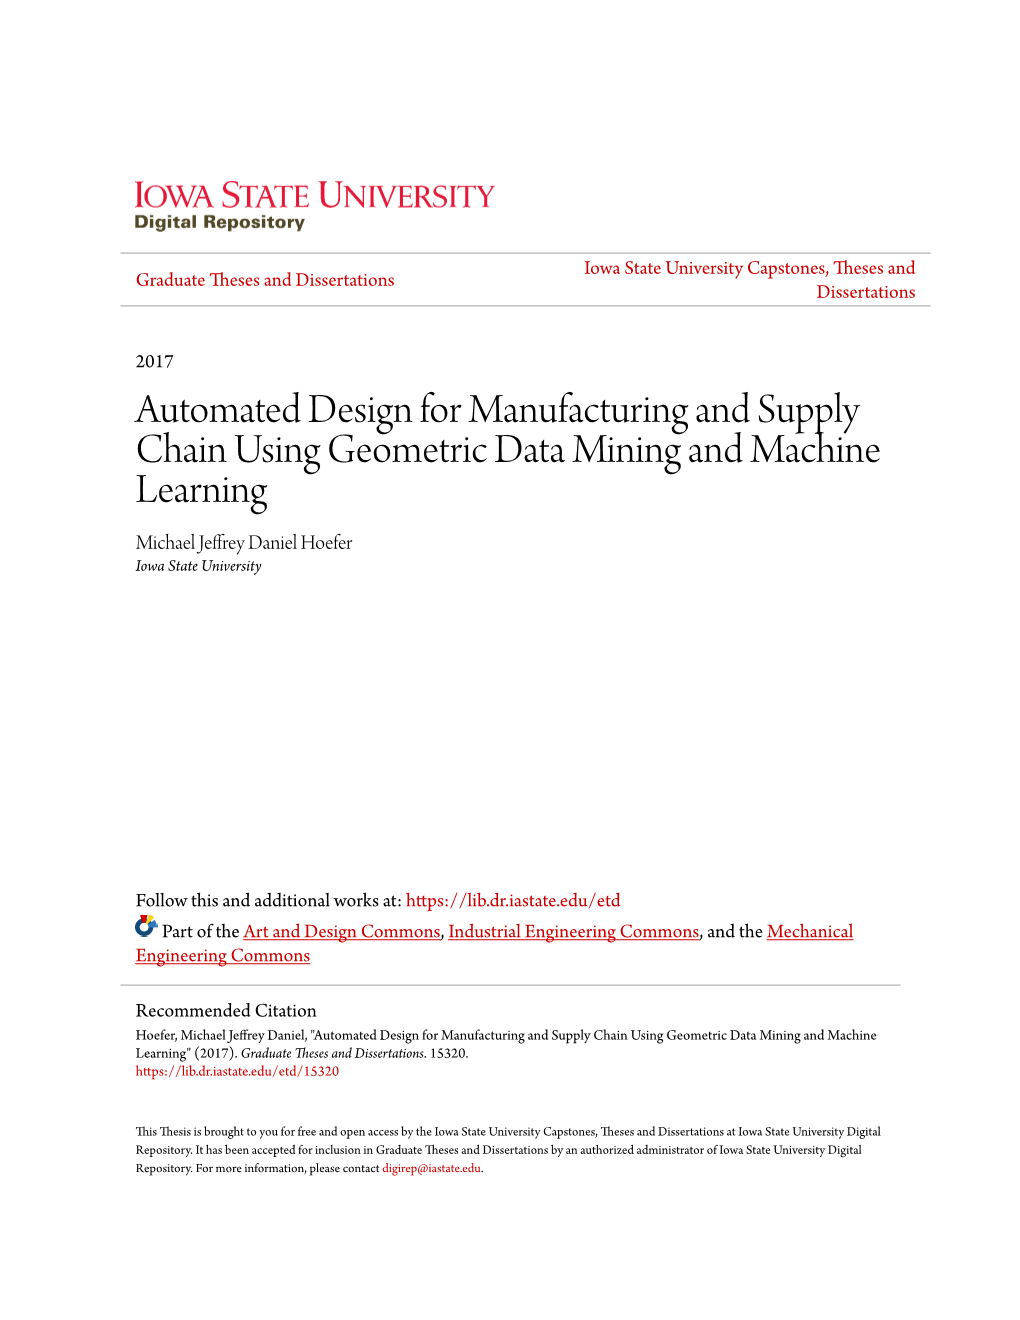 Automated Design for Manufacturing and Supply Chain Using Geometric Data Mining and Machine Learning Michael Jeffrey Daniel Hoefer Iowa State University